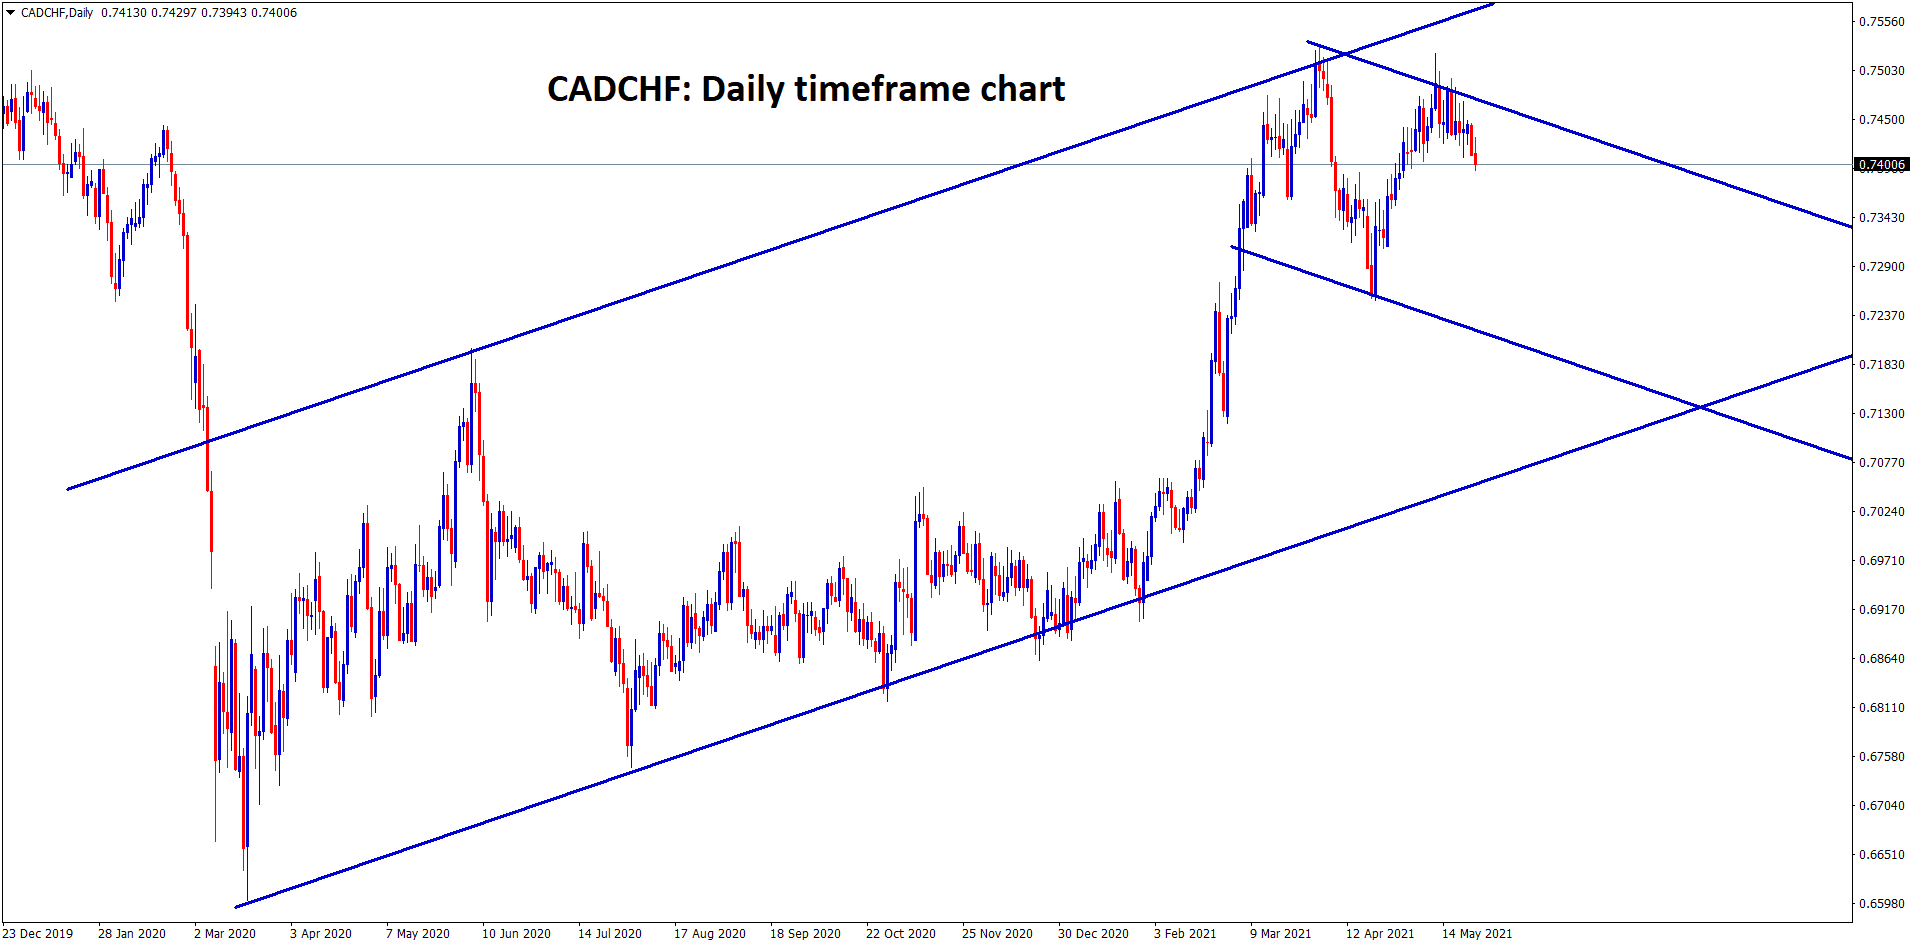 CADCHF is moving in a strong uptrend now trying to make some corrections from the high